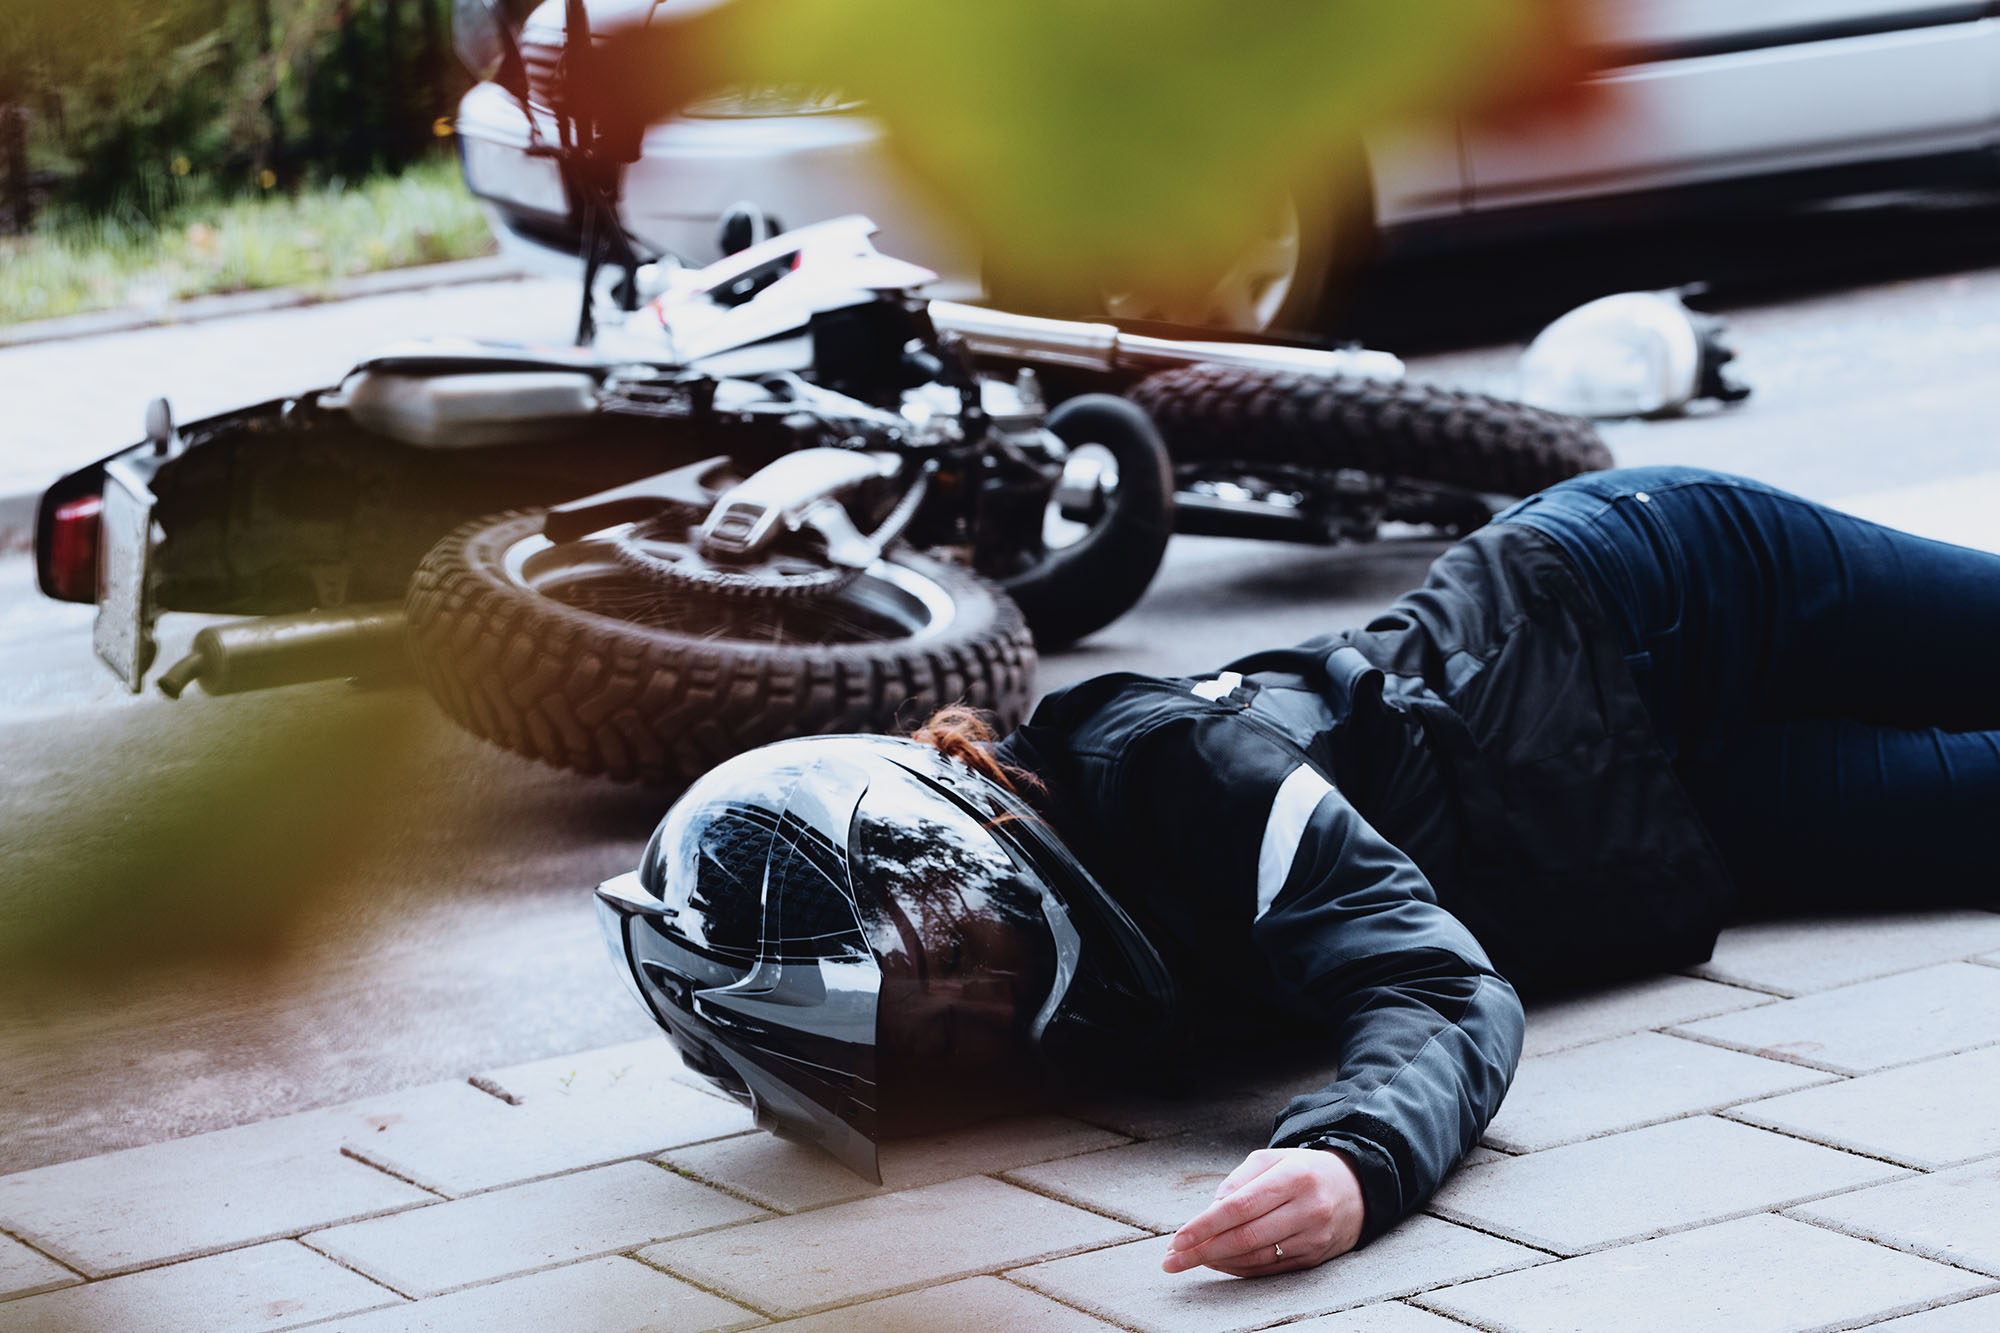 motorcycle accident claims compensation solicitors Birmingham